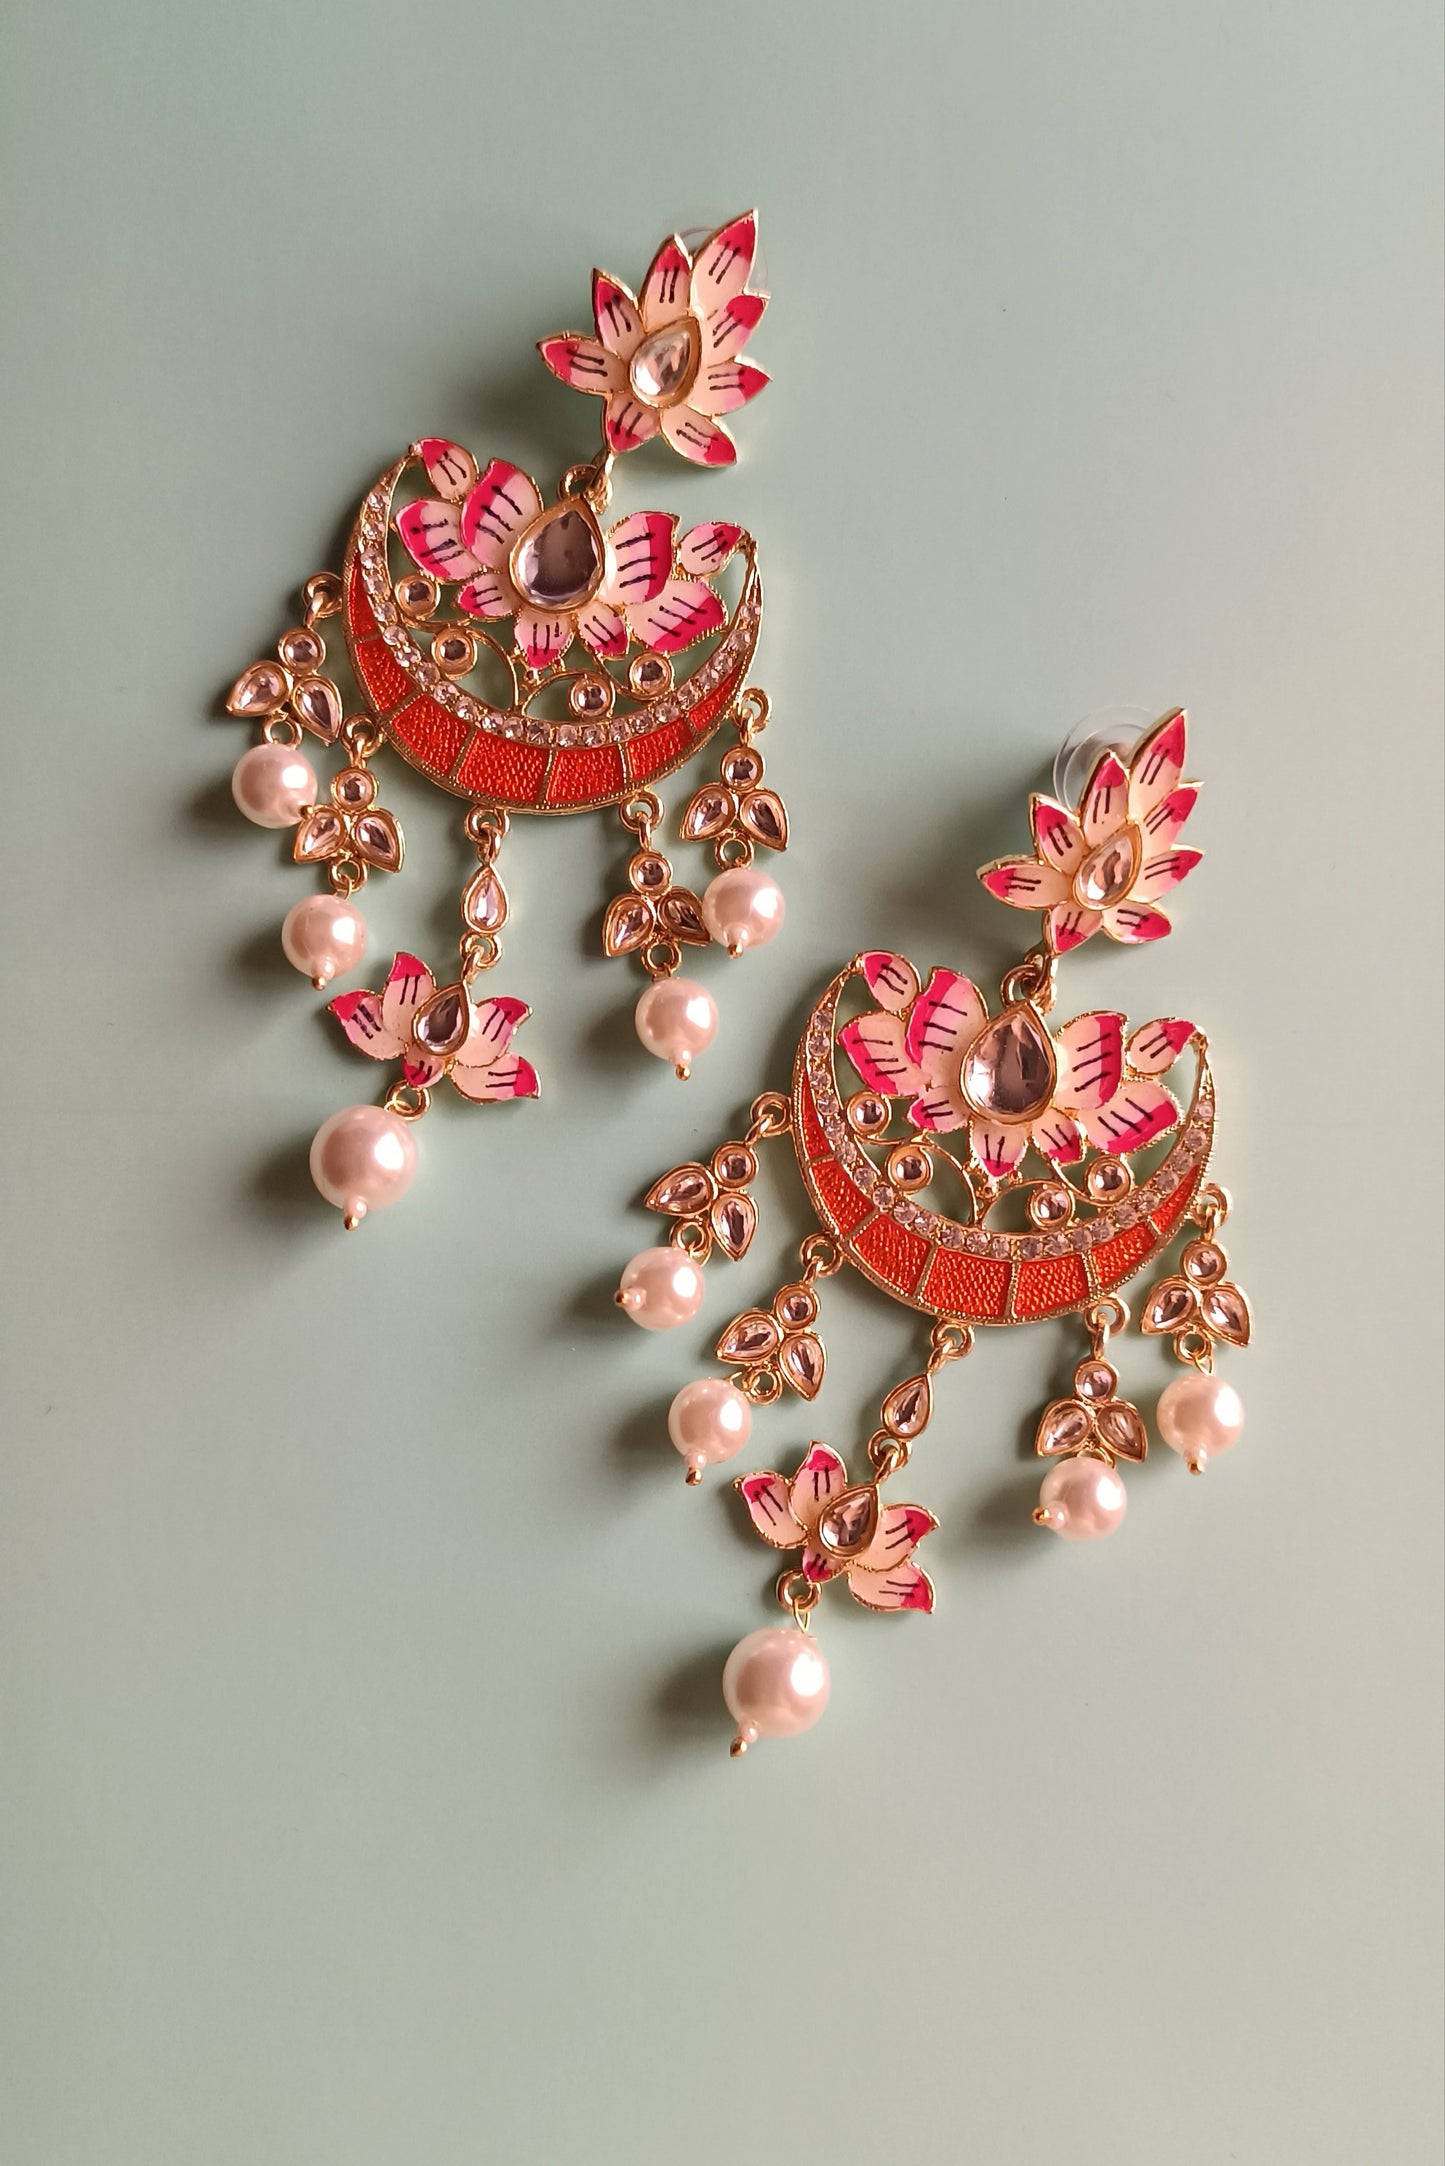 Dare to chase Statement Earrings